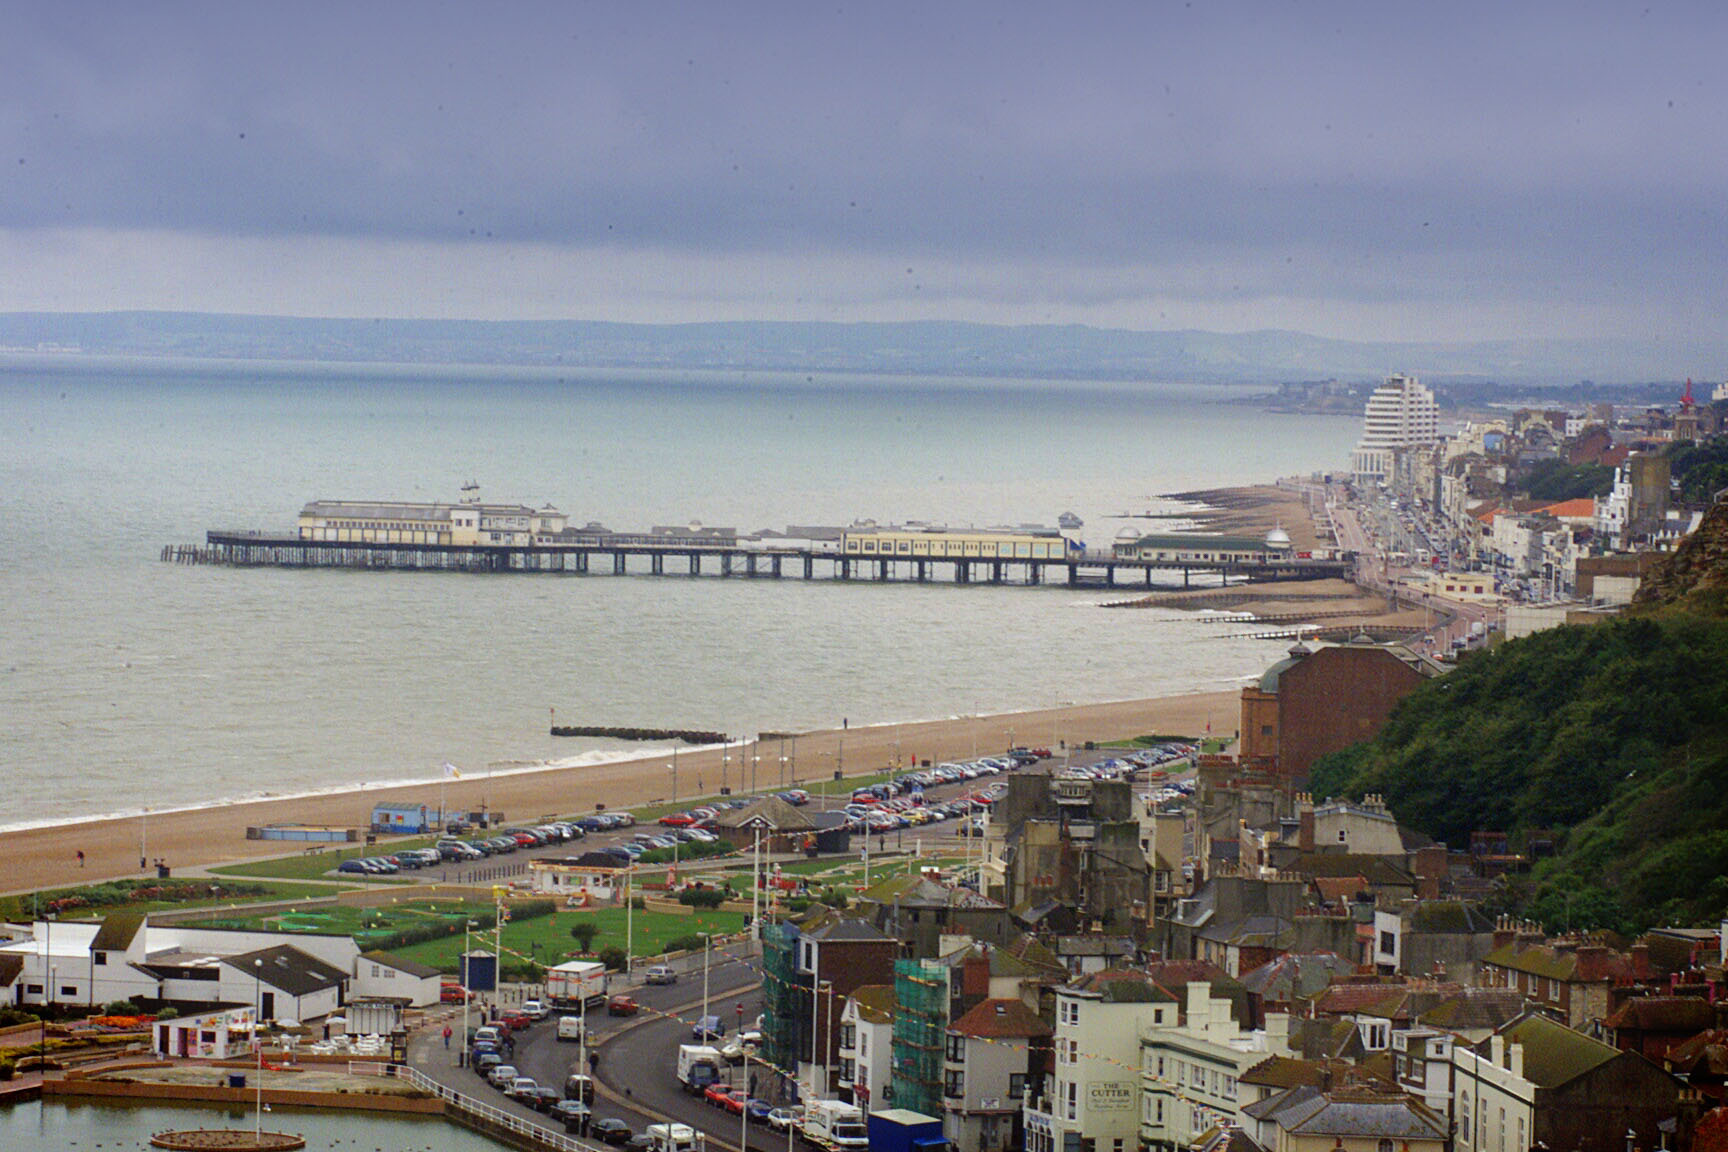 hastings seafront file pic taken from east hill cliff .hastings pier after restoration - hastings beach looking west to st leonards , bexhill and distance eastbourne (left of pic).